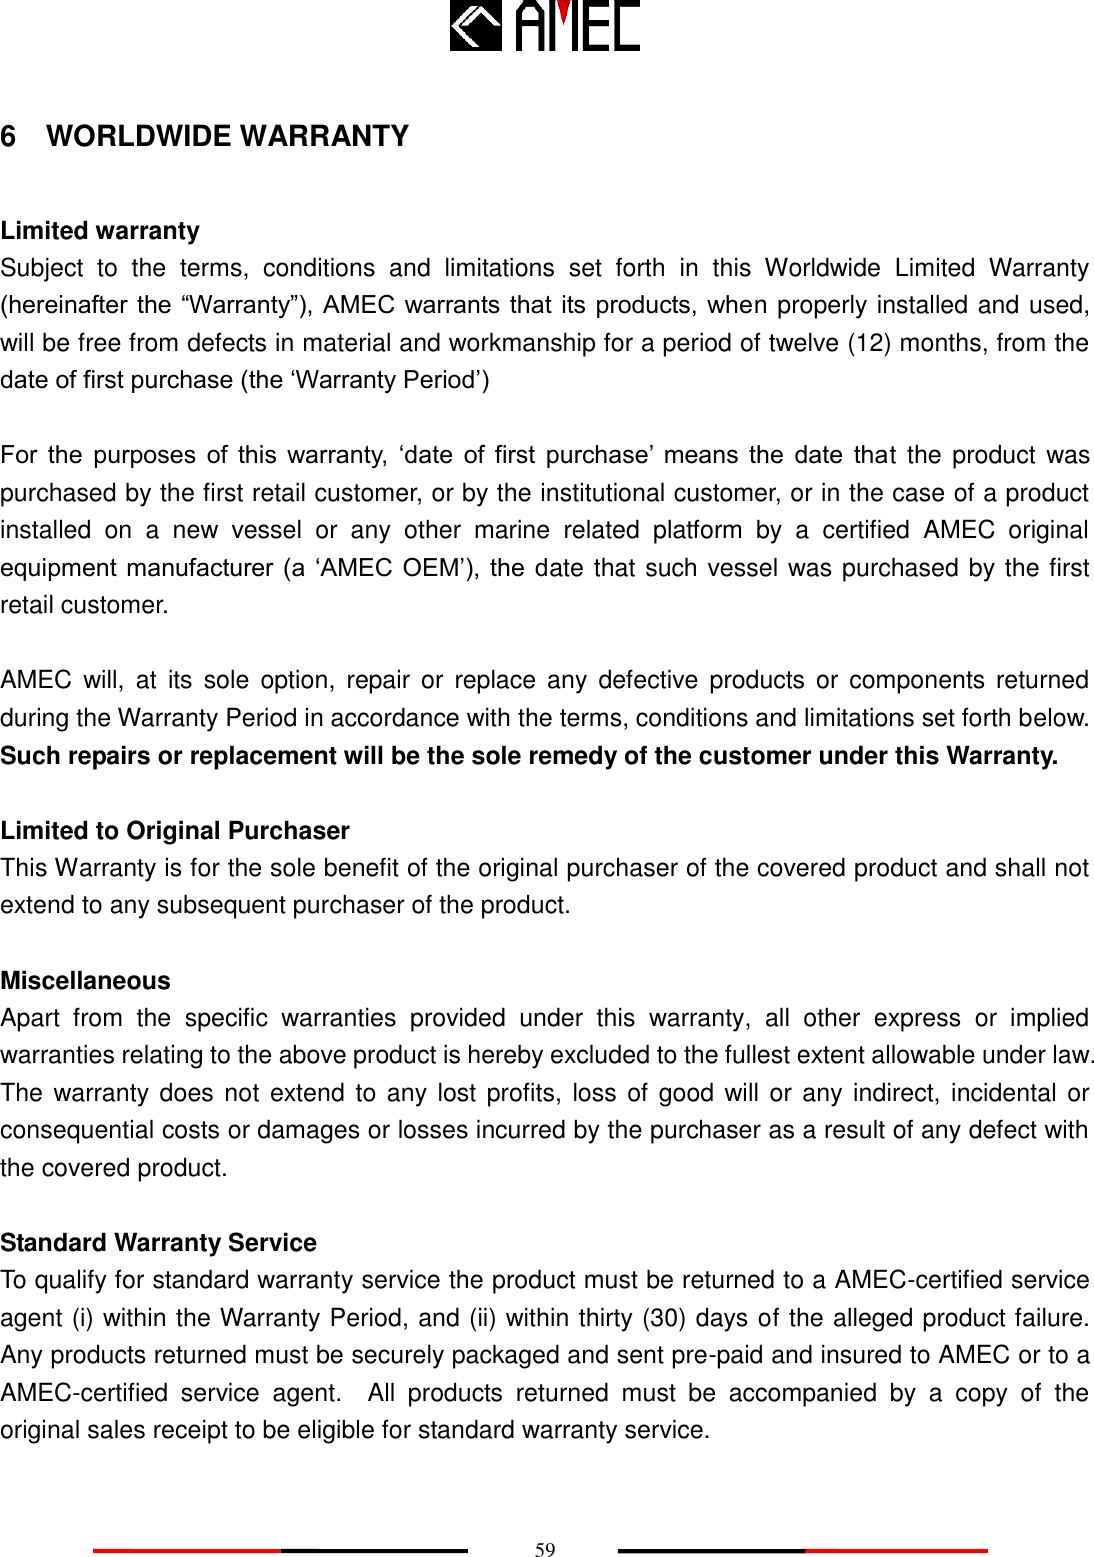    59 6  WORLDWIDE WARRANTY  Limited warranty Subject  to  the  terms,  conditions  and  limitations  set  forth  in  this  Worldwide  Limited  Warranty (hereinafter the “Warranty”), AMEC warrants that its products, when properly installed and used, will be free from defects in material and workmanship for a period of twelve (12) months, from the date of first purchase (the ‘Warranty Period’)  For  the  purposes  of  this  warranty,  ‘date  of  first  purchase’  means  the  date  that  the product  was purchased by the first retail customer, or by the institutional customer, or in the case of a product installed  on  a  new  vessel  or  any  other  marine  related  platform  by  a  certified  AMEC  original equipment manufacturer (a  ‘AMEC  OEM’), the date that such vessel was purchased by the first retail customer.  AMEC  will, at  its  sole option,  repair  or  replace  any  defective  products or  components returned during the Warranty Period in accordance with the terms, conditions and limitations set forth below. Such repairs or replacement will be the sole remedy of the customer under this Warranty.  Limited to Original Purchaser   This Warranty is for the sole benefit of the original purchaser of the covered product and shall not extend to any subsequent purchaser of the product.    Miscellaneous Apart  from  the  specific  warranties  provided  under  this  warranty,  all  other  express  or  implied warranties relating to the above product is hereby excluded to the fullest extent allowable under law. The warranty does not  extend to any lost profits, loss of  good  will or any indirect, incidental or consequential costs or damages or losses incurred by the purchaser as a result of any defect with the covered product.  Standard Warranty Service To qualify for standard warranty service the product must be returned to a AMEC-certified service agent (i) within the Warranty Period, and (ii) within thirty (30) days of the alleged product failure. Any products returned must be securely packaged and sent pre-paid and insured to AMEC or to a AMEC-certified  service  agent.    All  products  returned  must  be  accompanied  by  a  copy  of  the original sales receipt to be eligible for standard warranty service.   